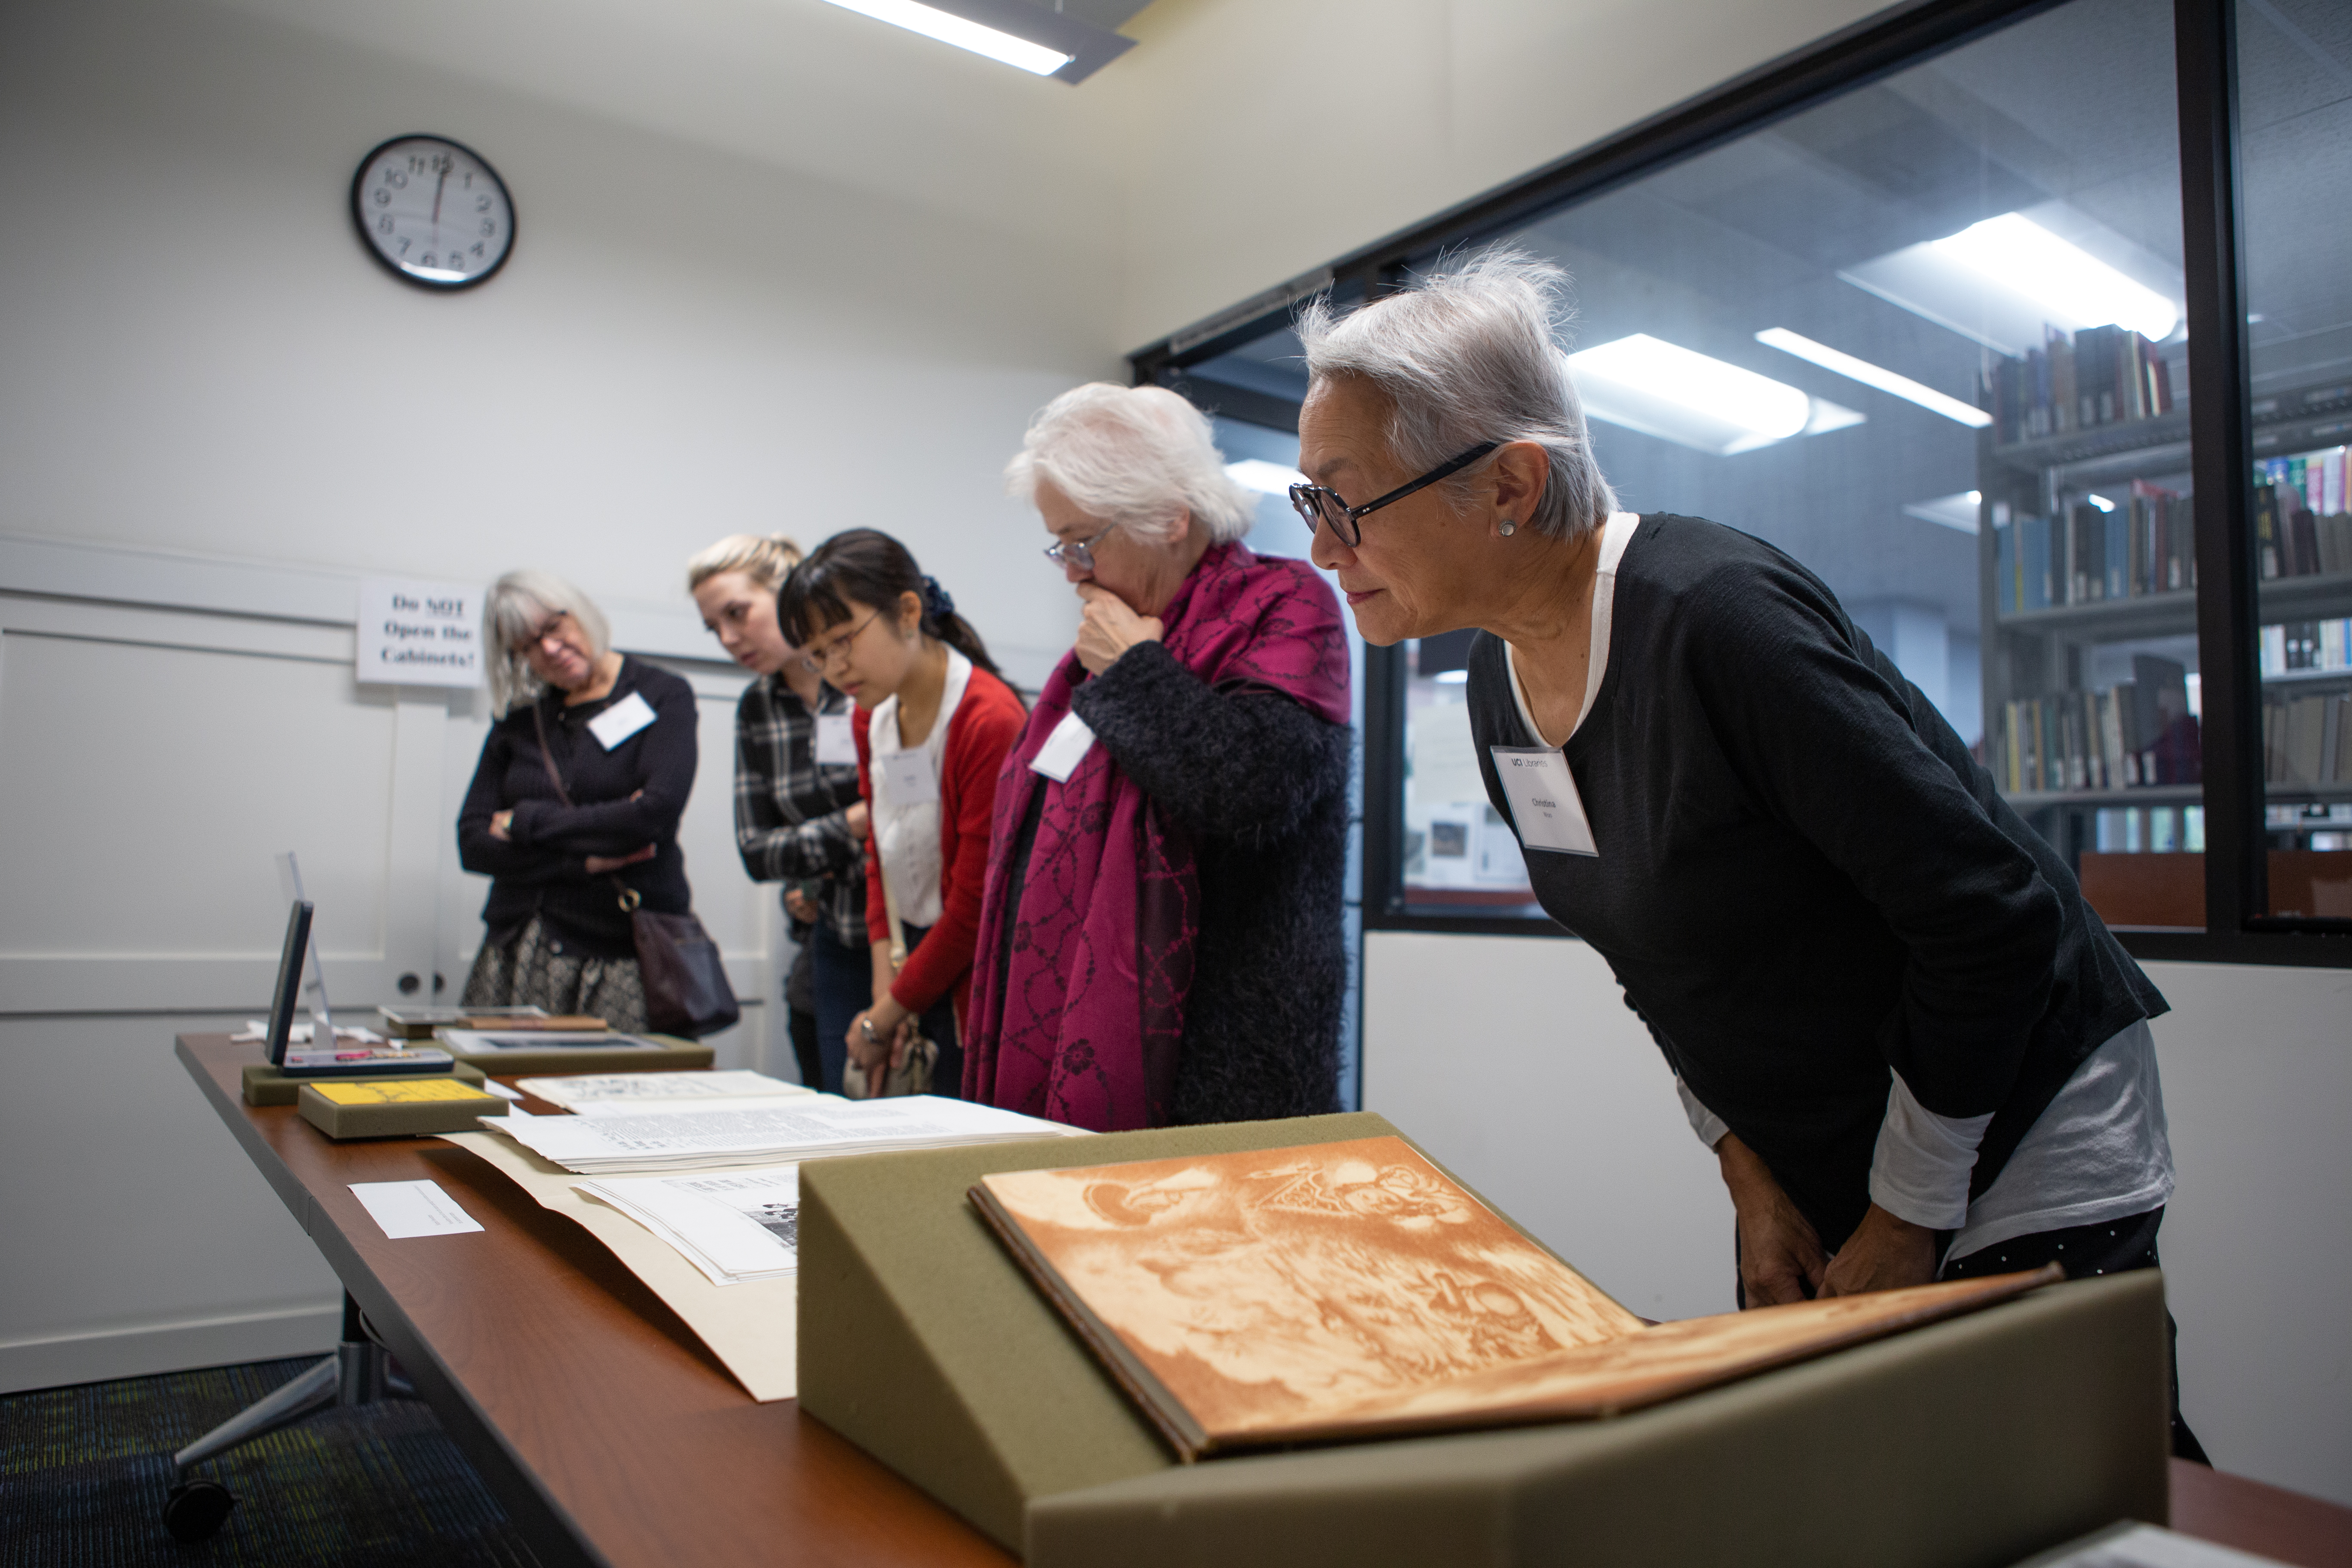 Patrons view materials in the Orange County and Southeast Asian Archive Center.